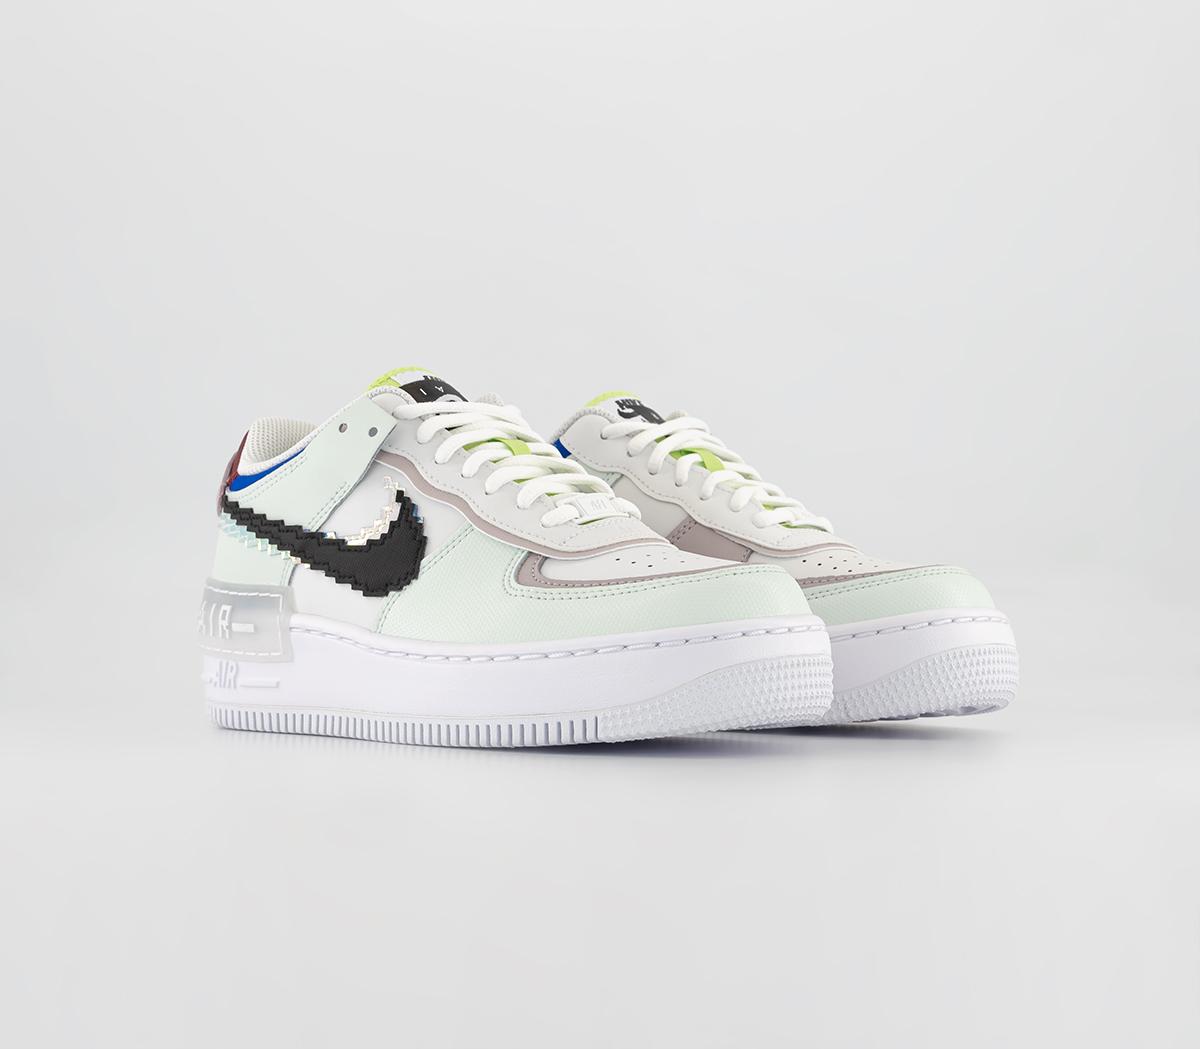 Nike Womens Air Force 1 Shadow Trainers Barely Green Black White Platinum Violet, 6